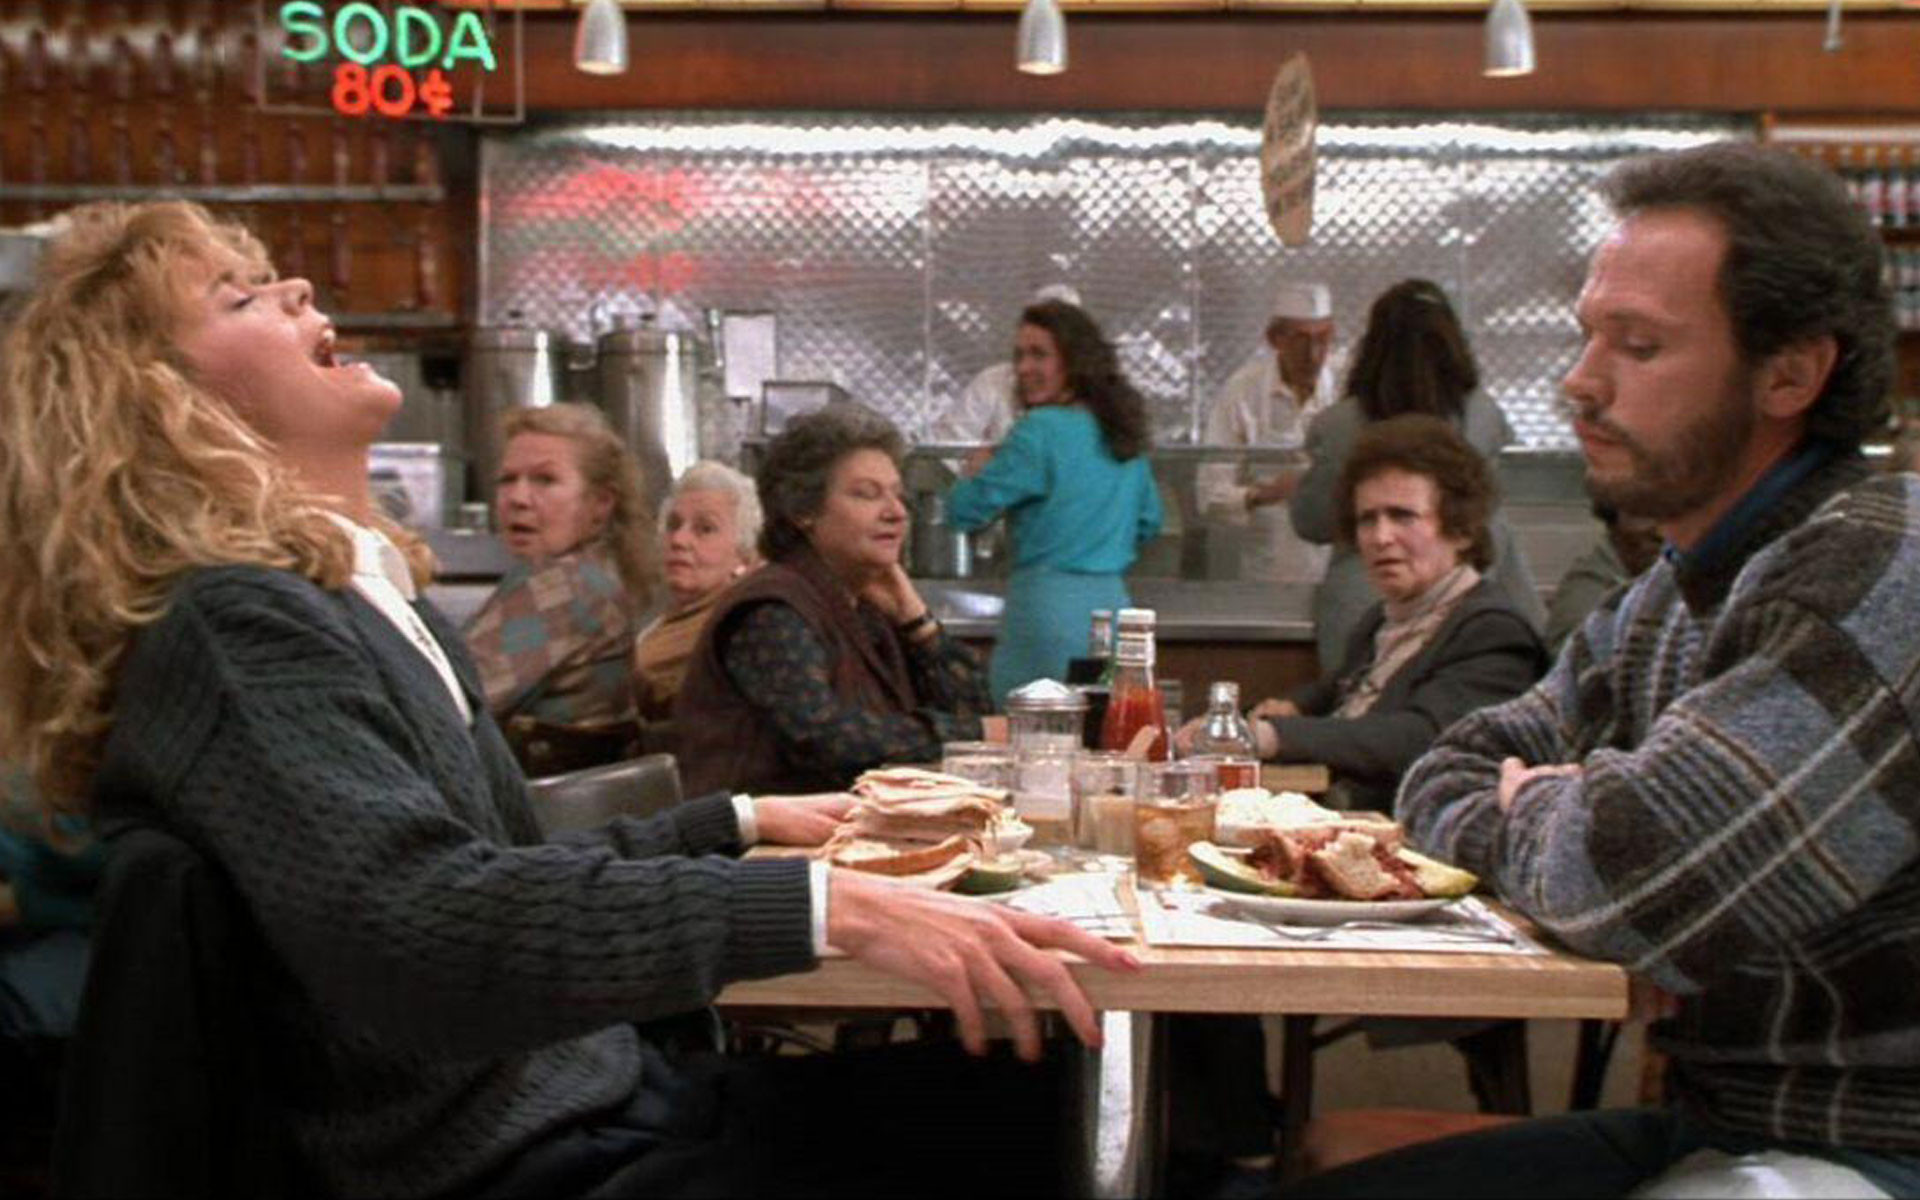 Famous diner scene from "When Harry Met Sally" where Sally fakes an orgasm over a nonvegan sandwich